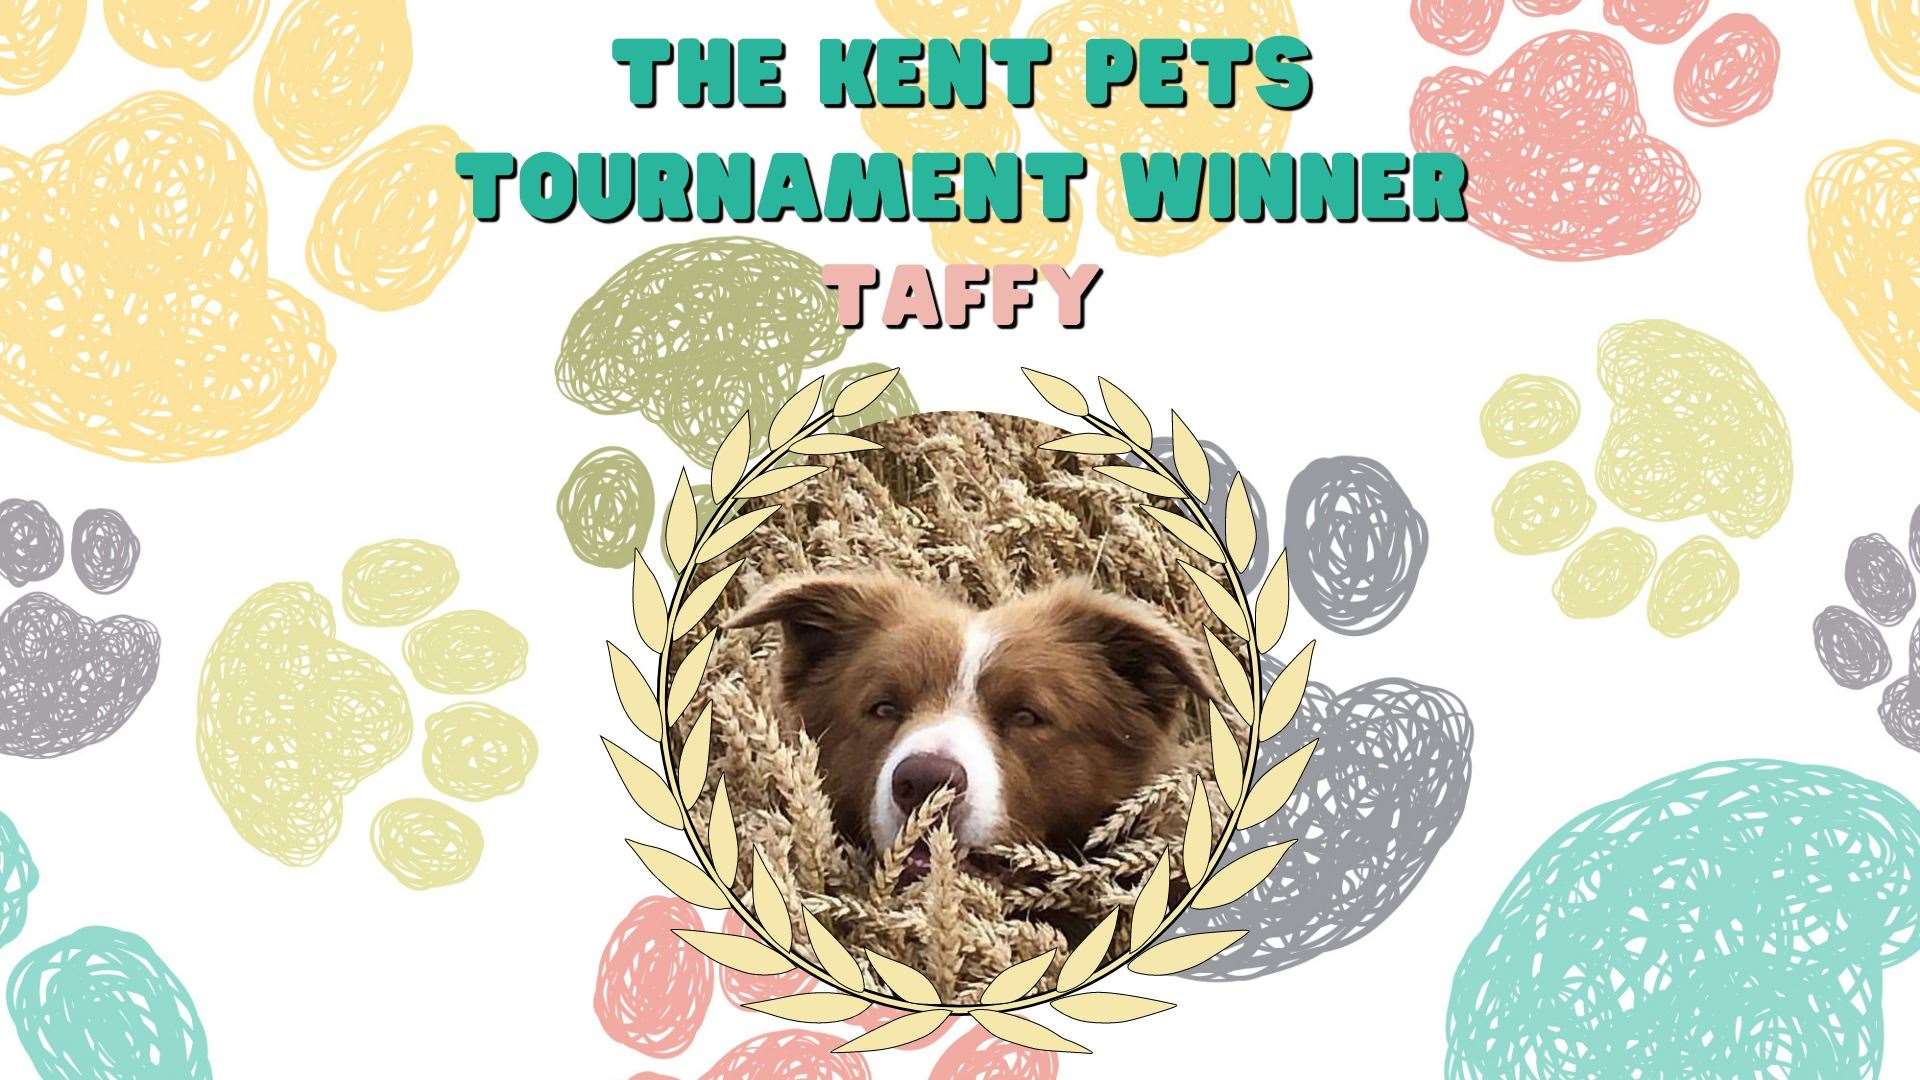 Taffy the Welsh collie is not only December's Pet of The Month, but the overall champion of the Kent Pets Tournament